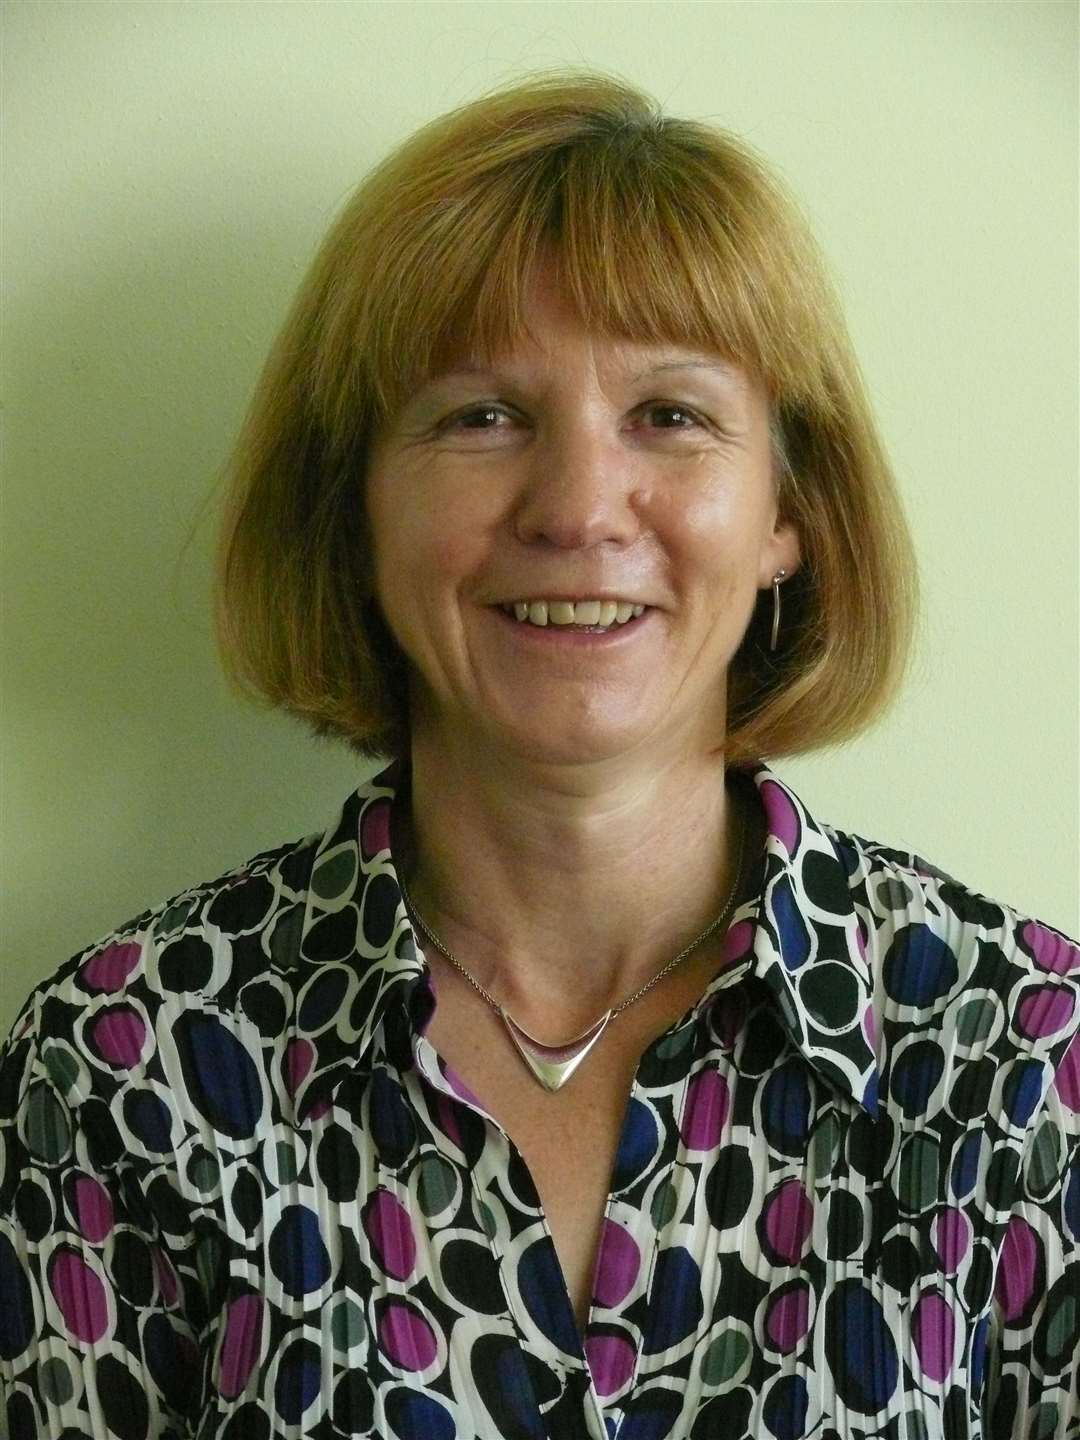 Carol Grant has worked in primary education in Caithness for more than 30 years.